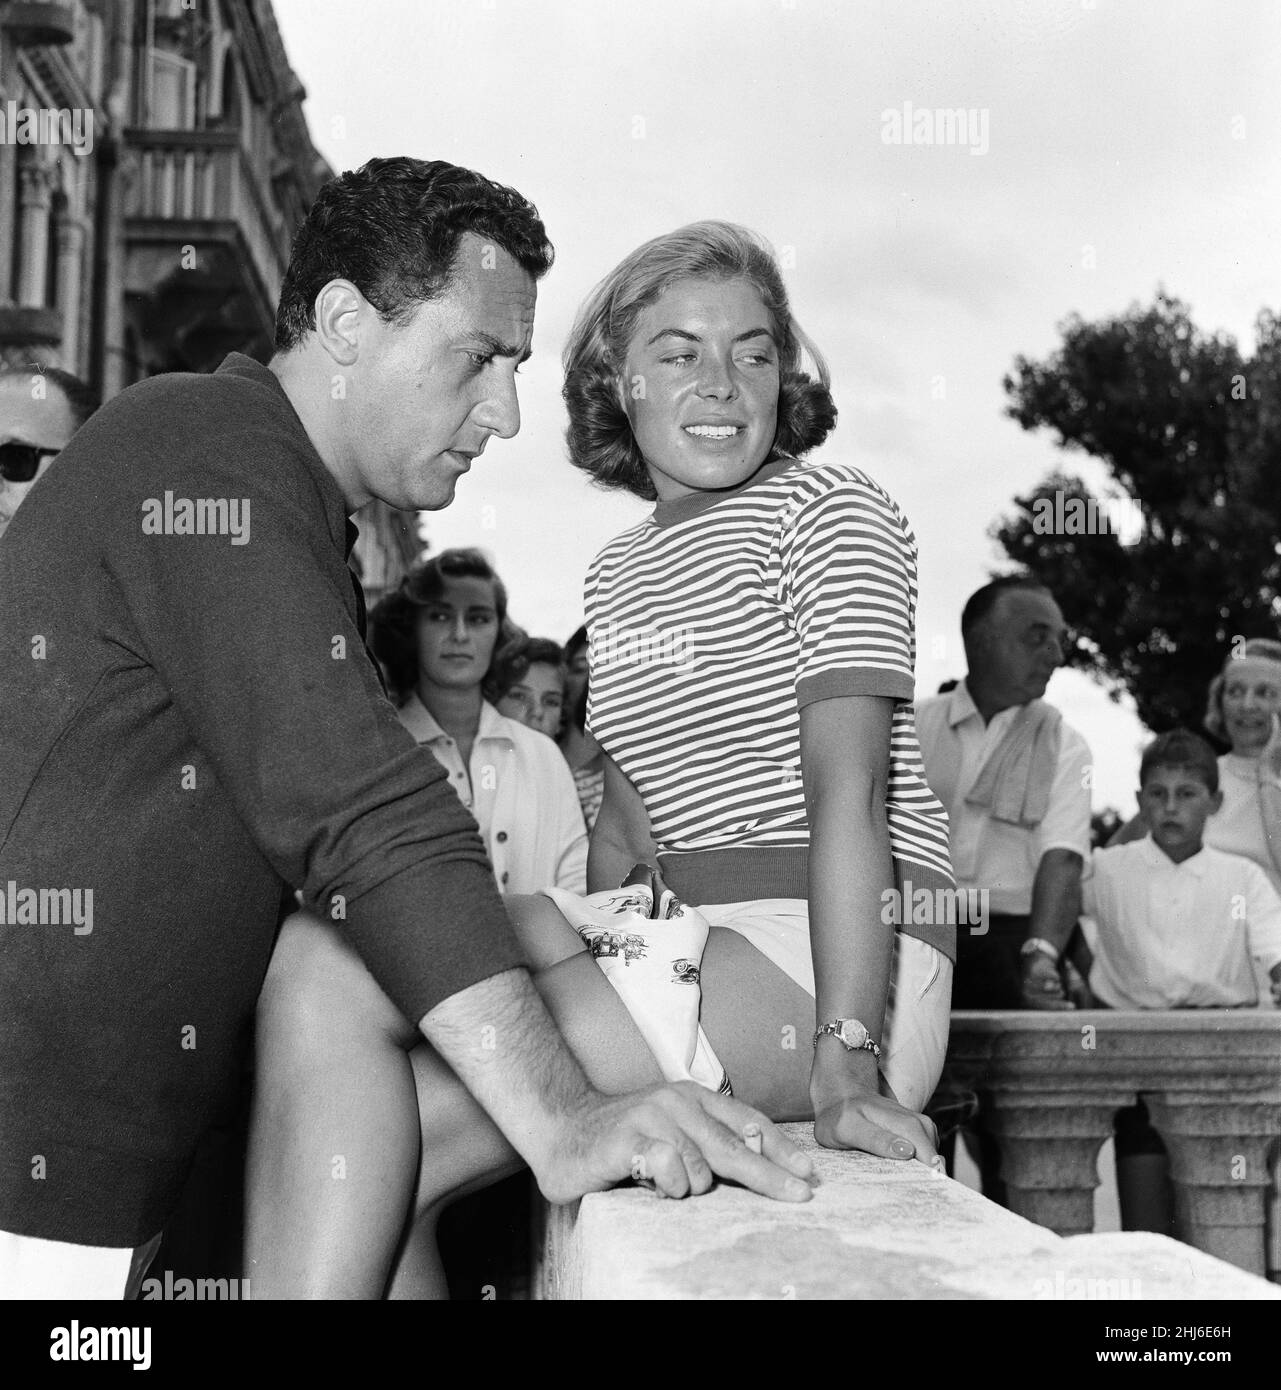 1956 Venice Film Festival, Friday 31st August 1956. Our Picture Shows ... Italian actor and comic Alberto Sordi, with young starlet Ziti.    Alberto Sordi is also a film director and the dubbing voice of Oliver Hardy in the Italian version of the Laurel and Hardy films. Stock Photo